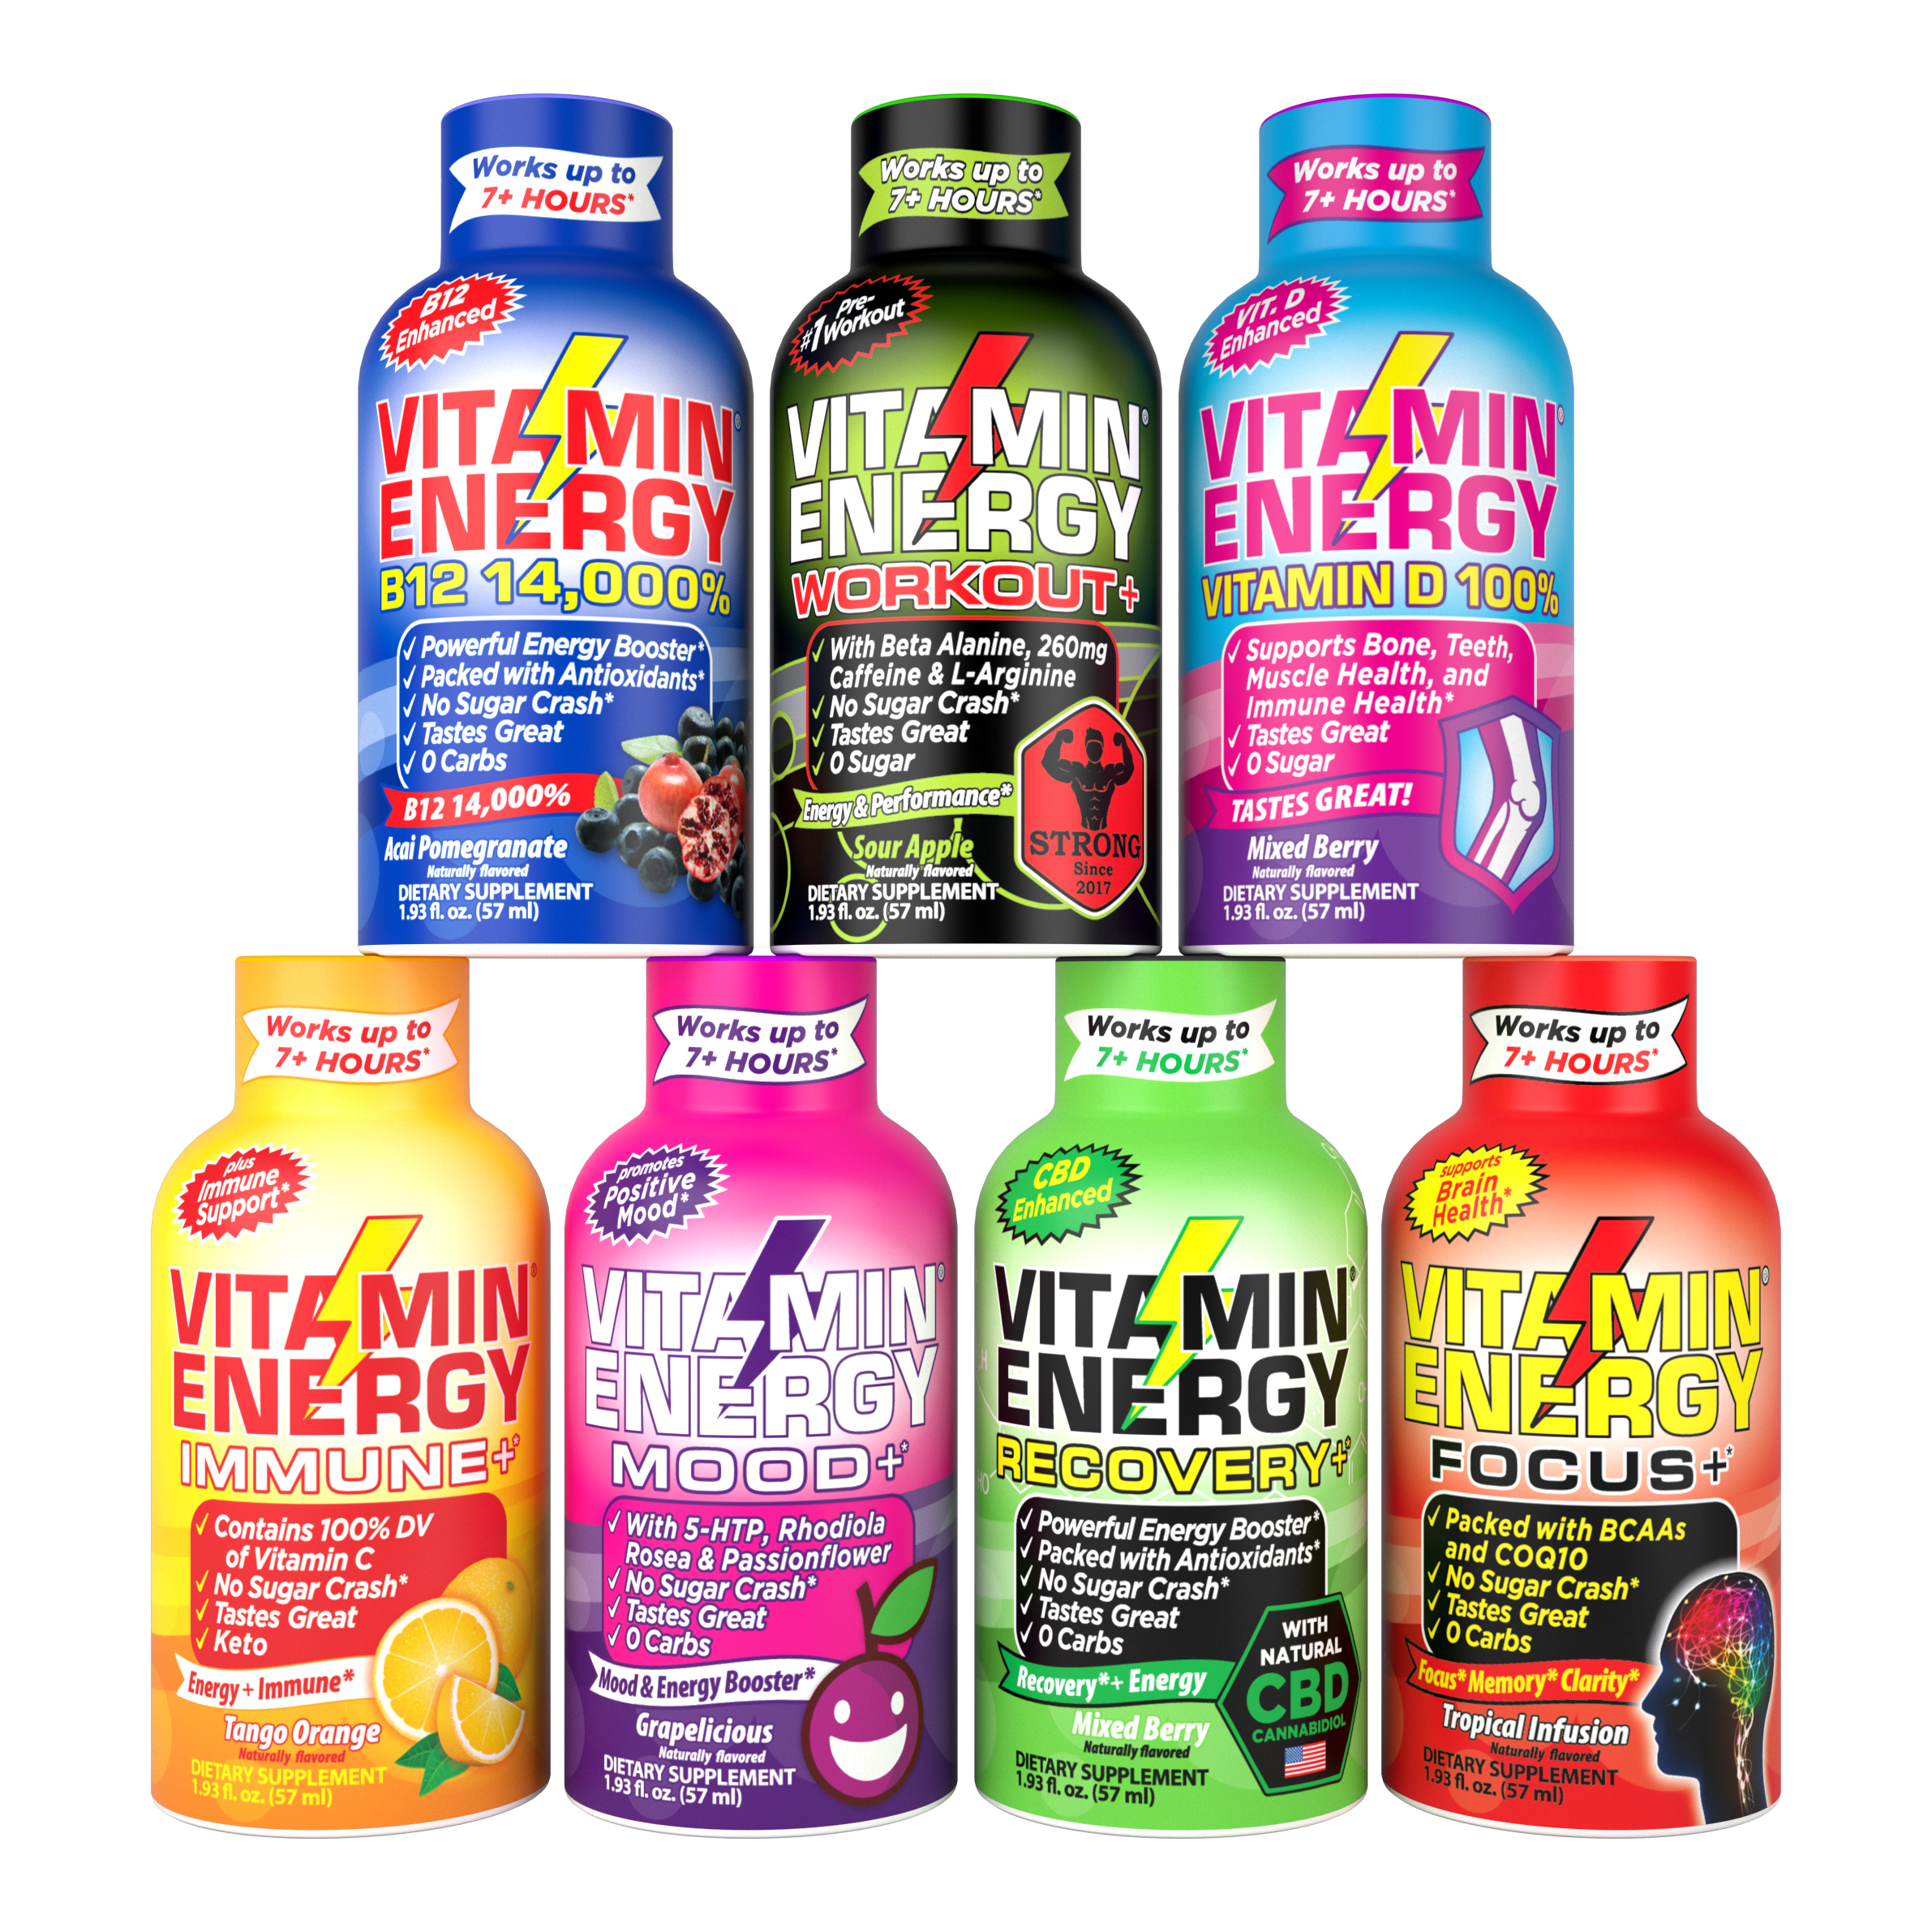 Vitamin Energy, LLC, Wednesday, July 29, 2020, Press release picture